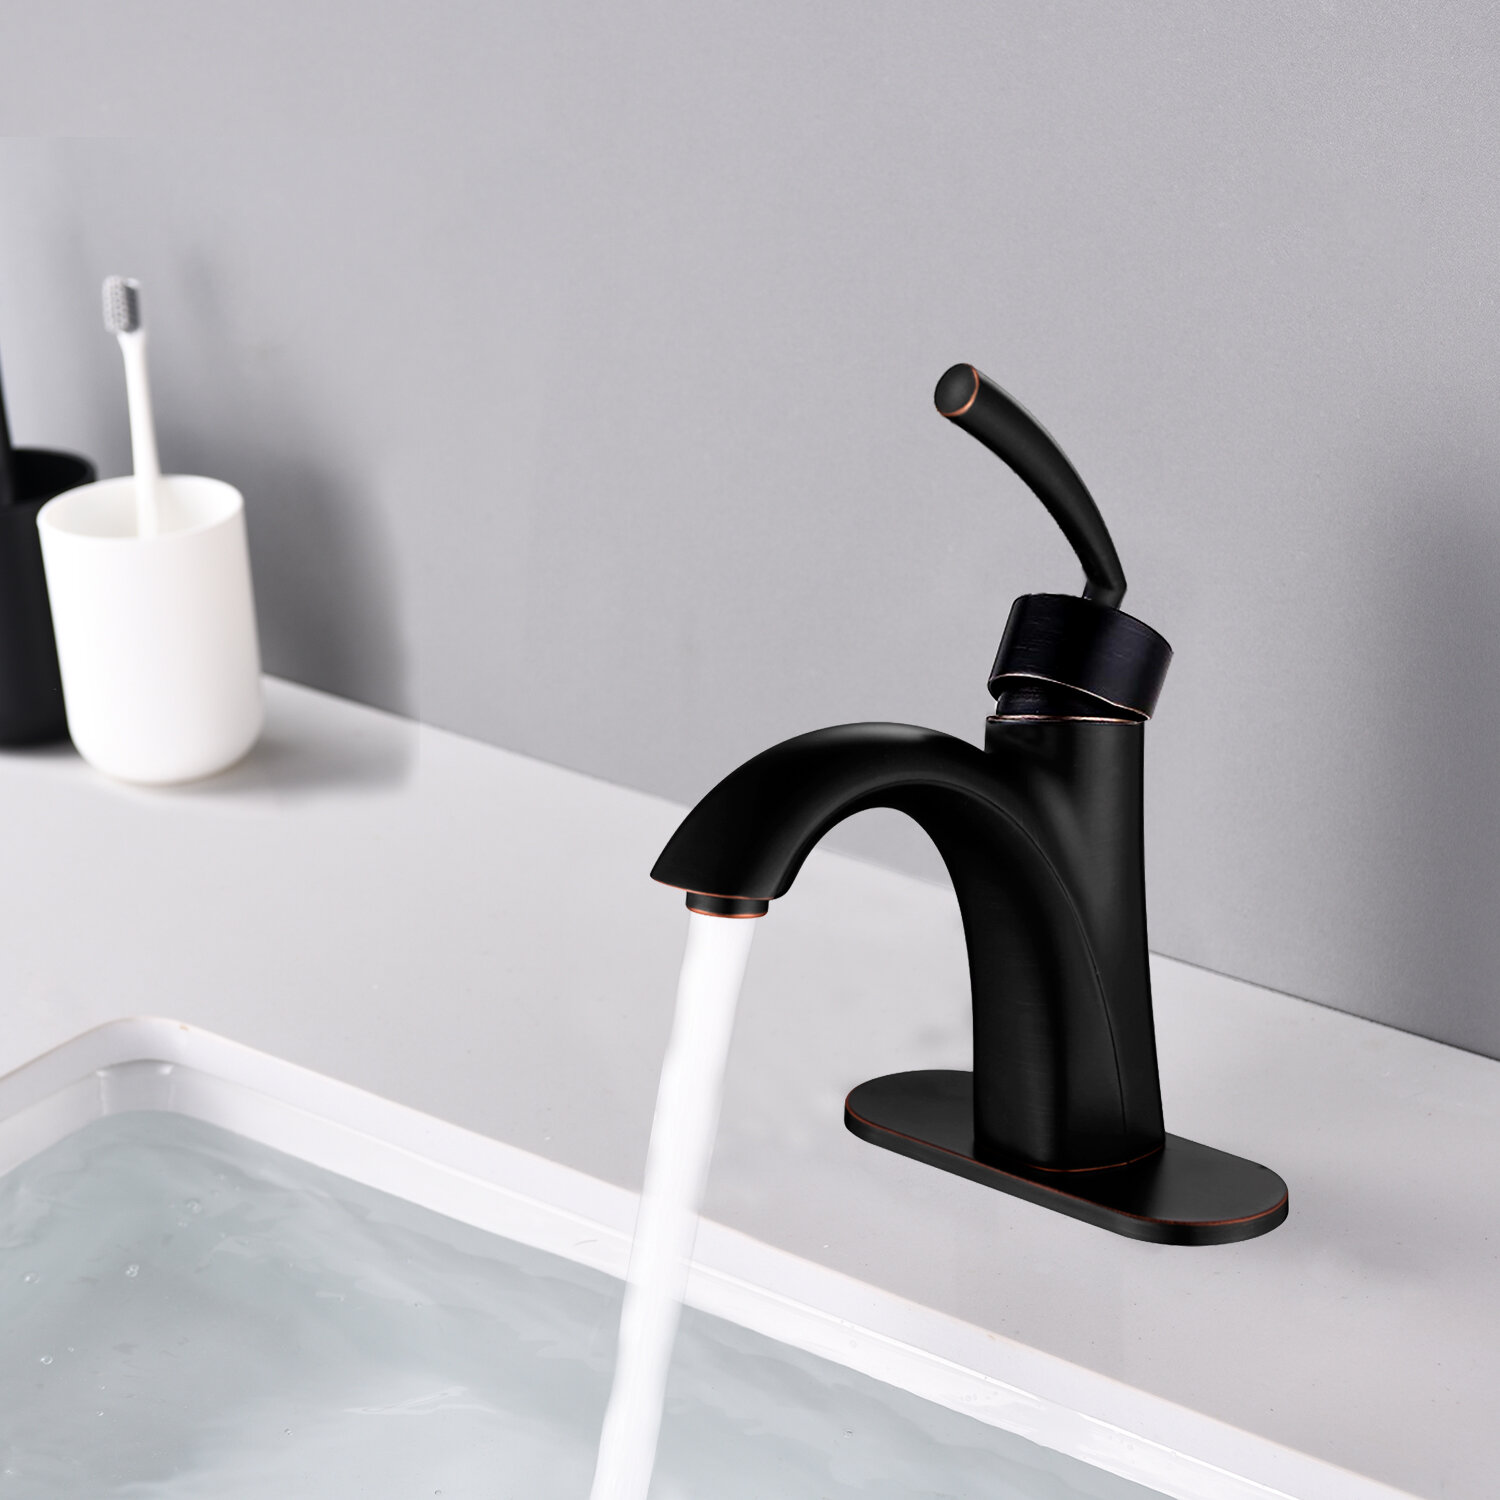 Renist Single Hole Bathroom Faucet With Drain Assembly And Deck